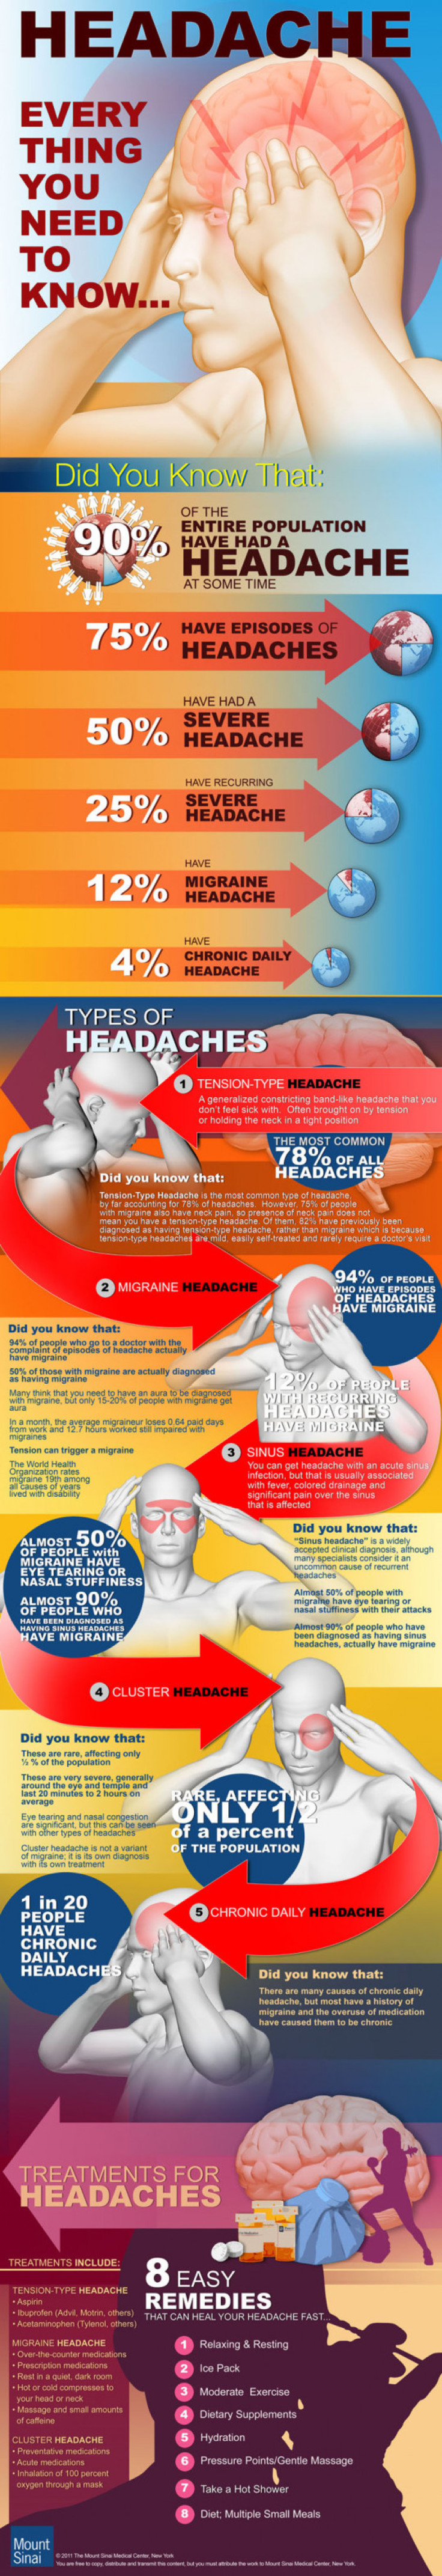 Headache: Everything you Need to Know